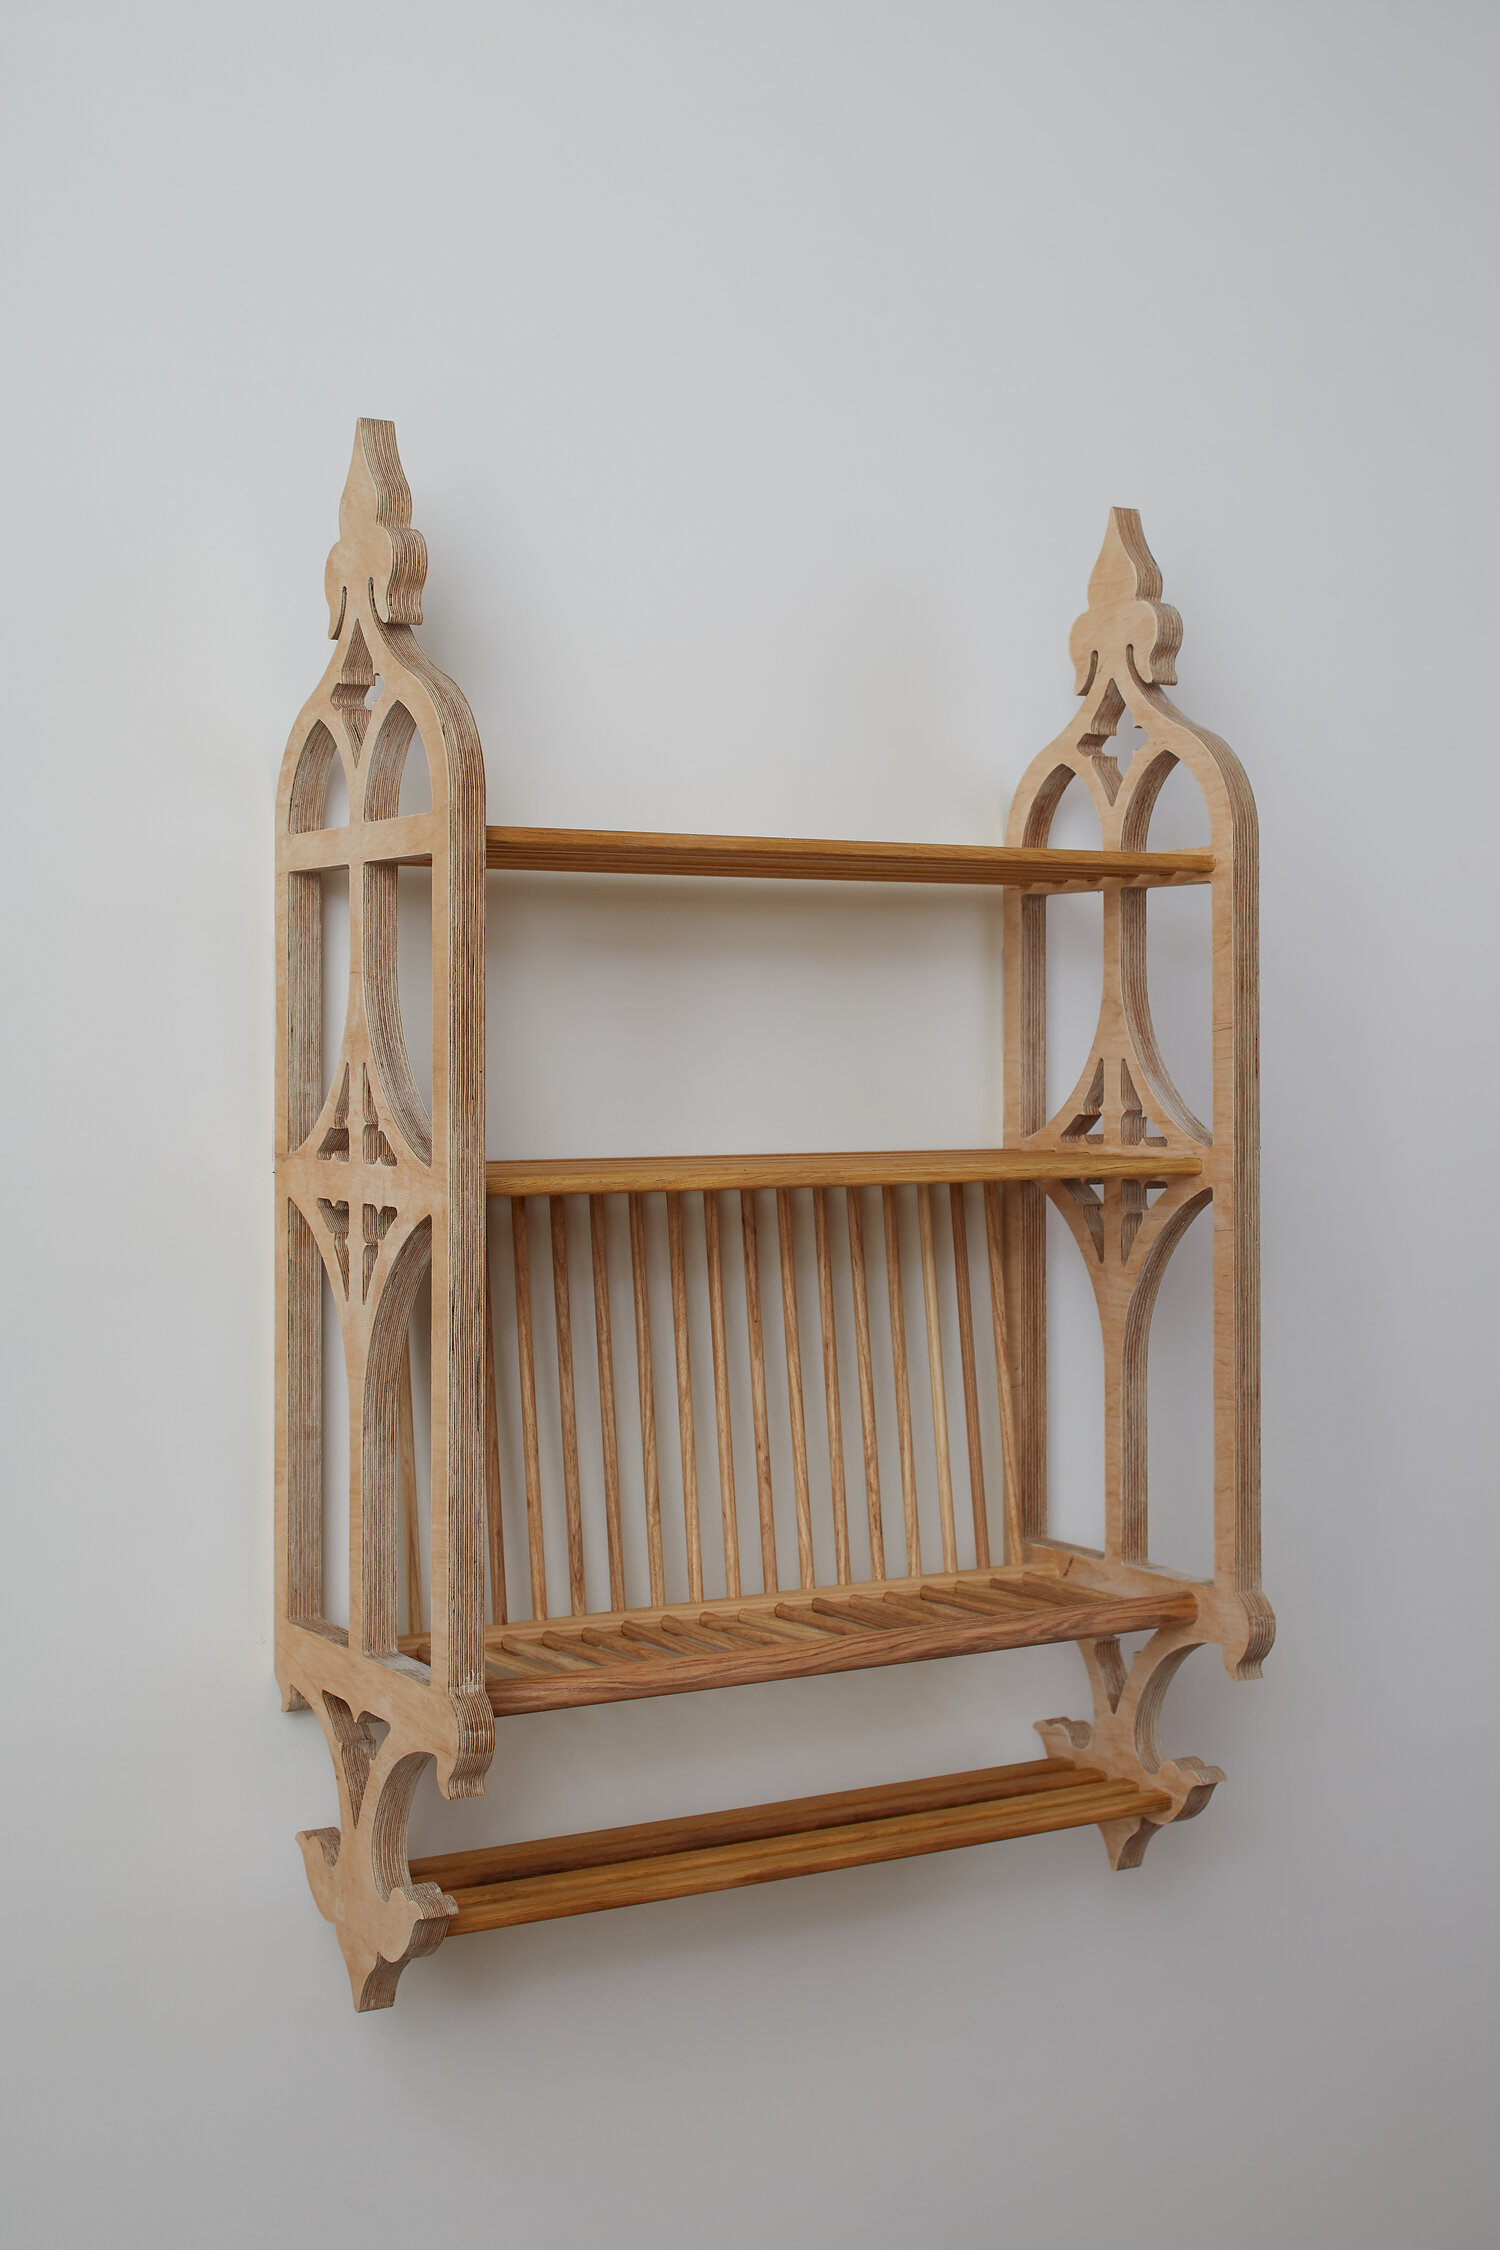 Traditional Wooden Plate Rack